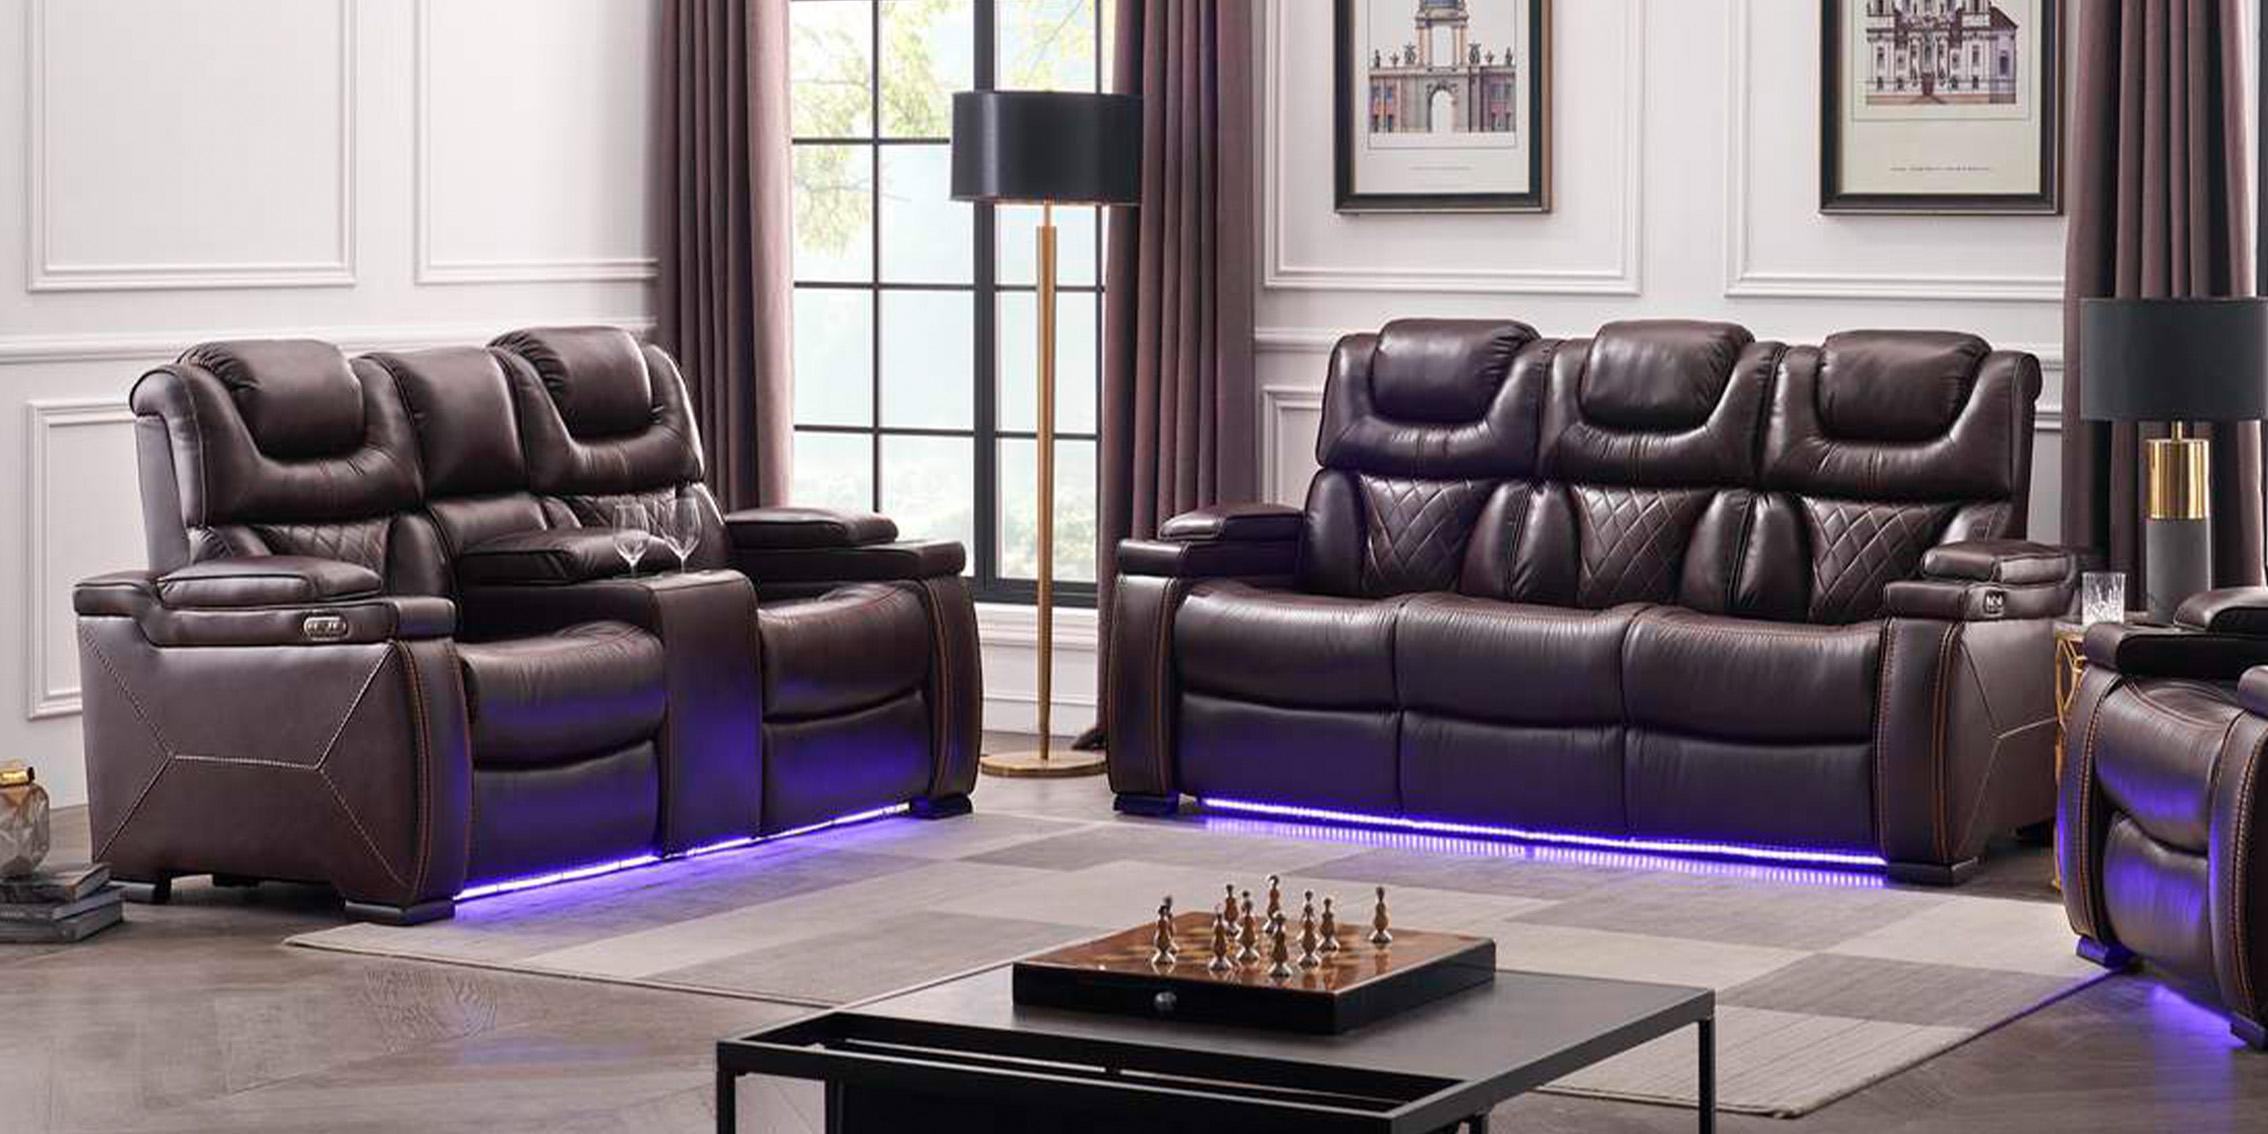 

    
Brown Eco Leather Power Recliner Sofa Set 3 LEXUS Galaxy Home Contemporary
